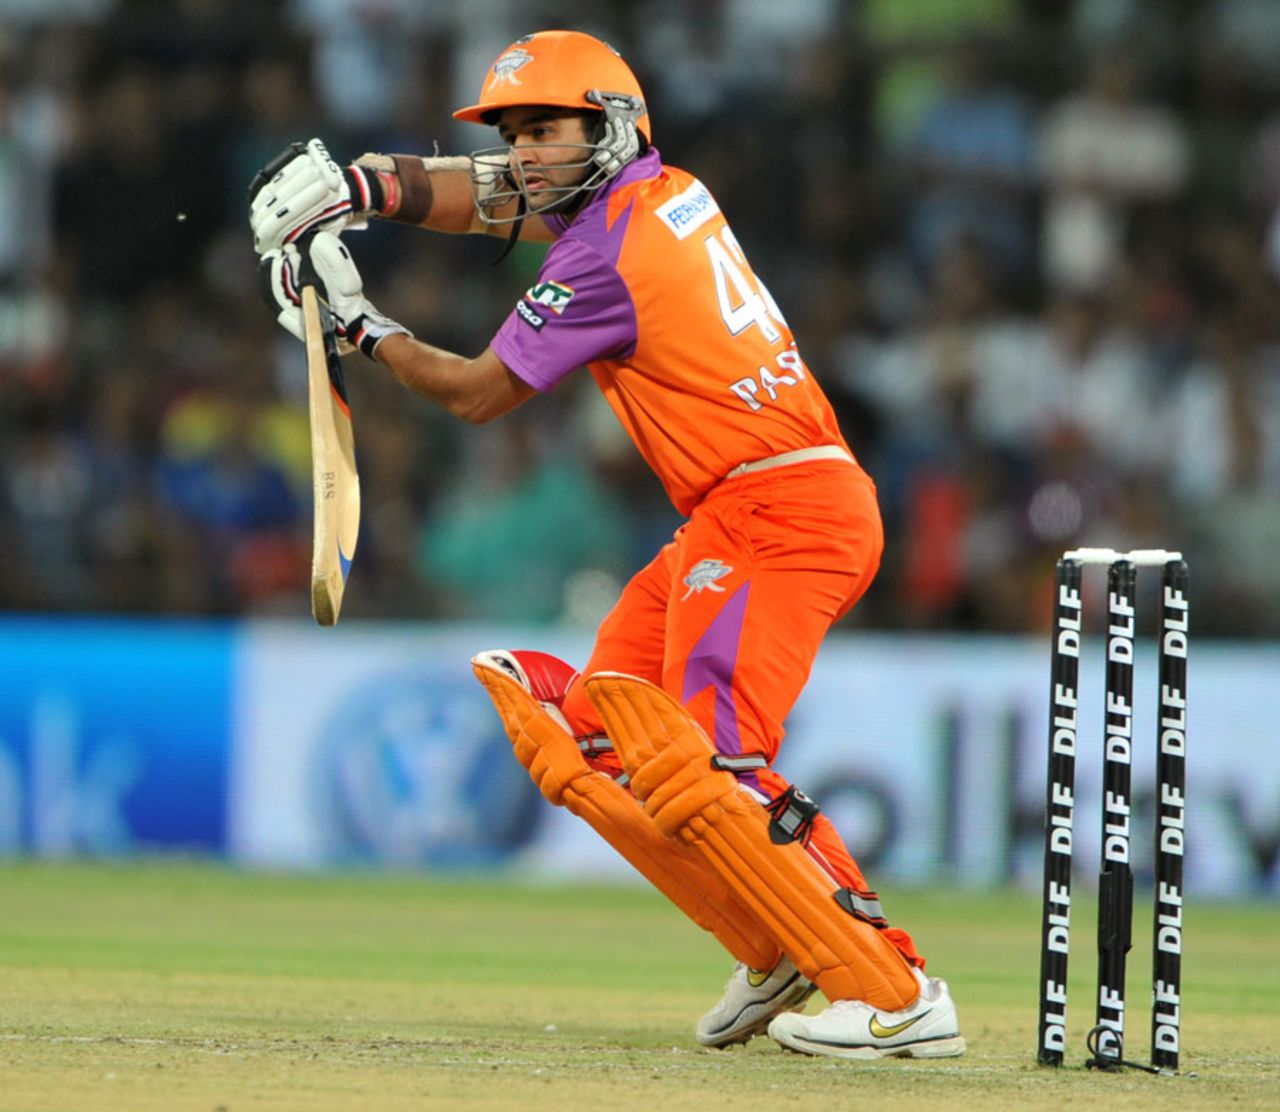 Parthiv Patel opens the face, Kochi Tuskers Kerala v Rajasthan Royals, IPL 2011, Indore, May 15, 2011 